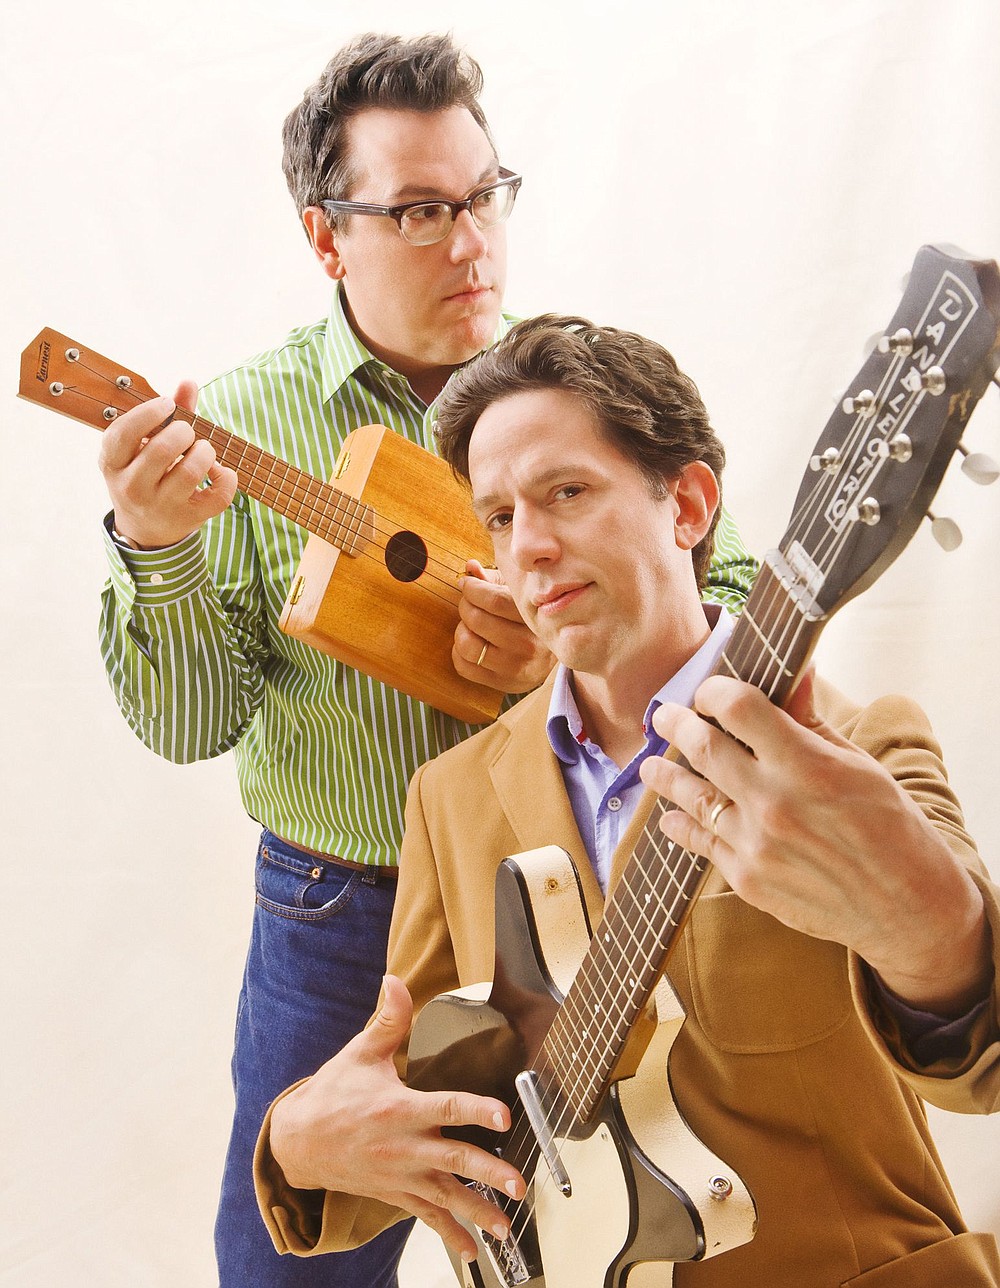 Jayme Thornton
They Might Be Giants' live shows are a departure from the duo's recorded music. John Linnell, foreground, and John Flansburgh will perform with an expanded band and will use an electronic drum kit that emits novel sounds.